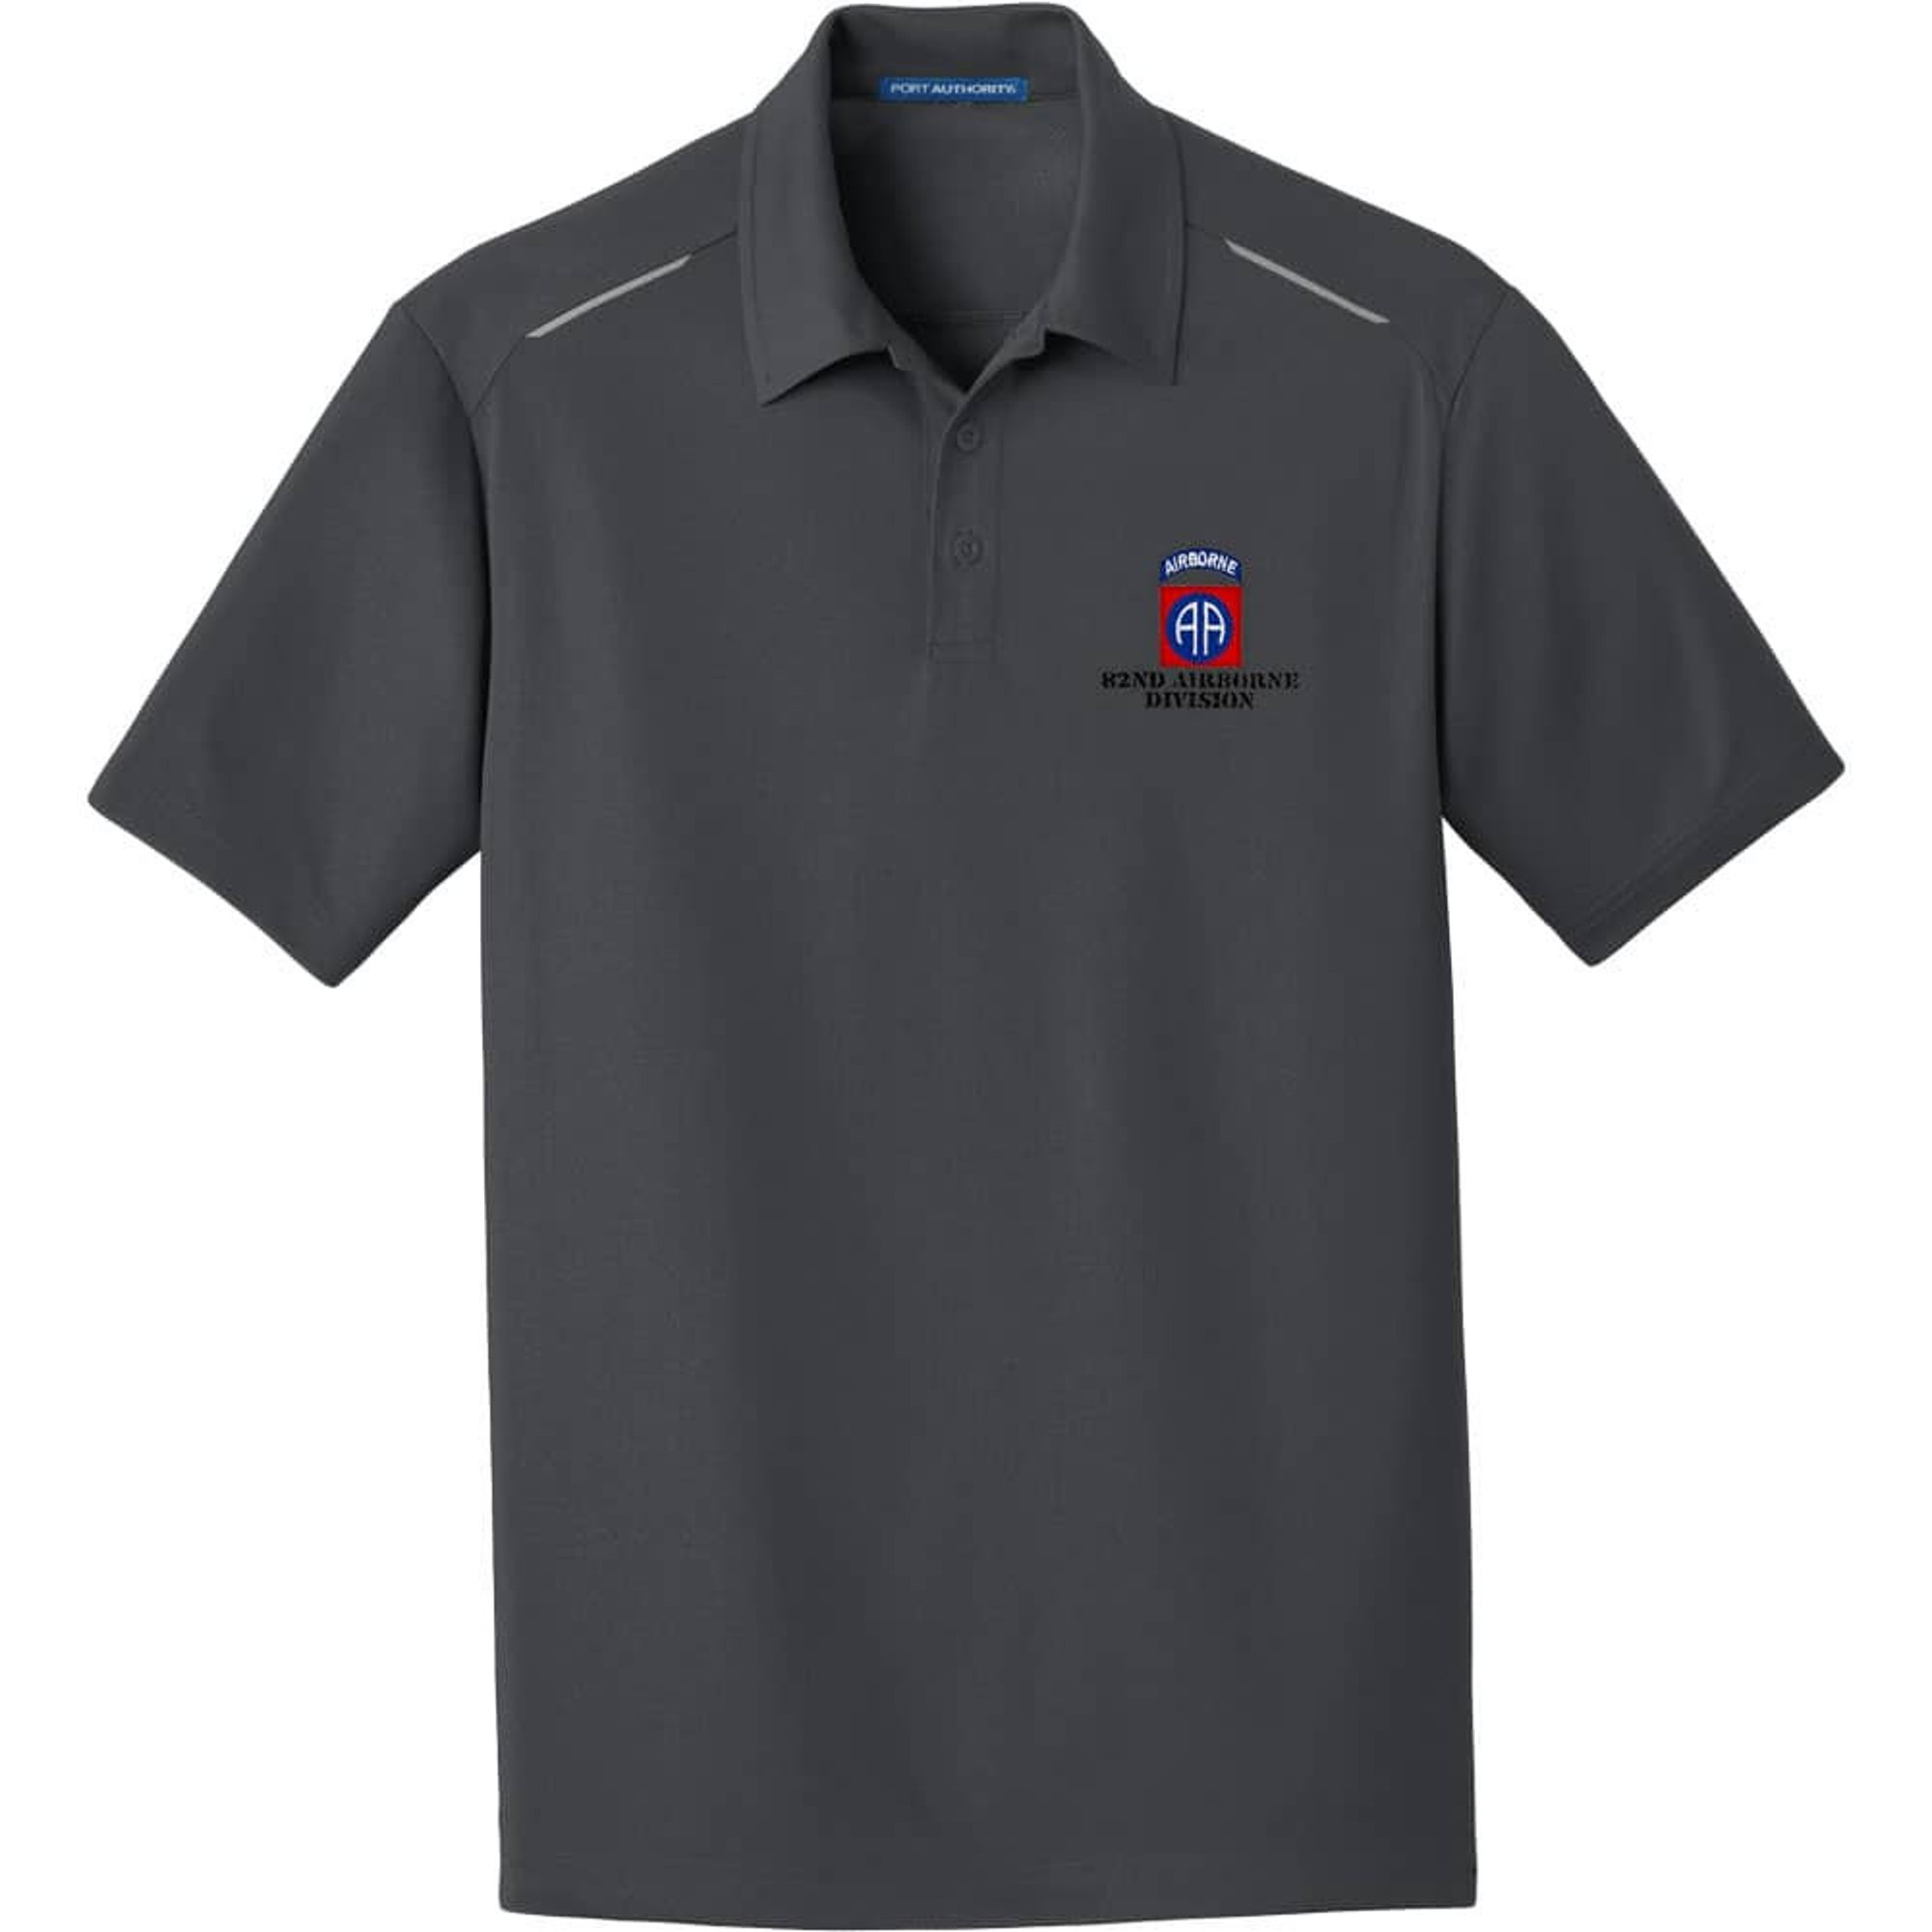 Army 82nd Airborne Division Embroidered Performance Golf Polo